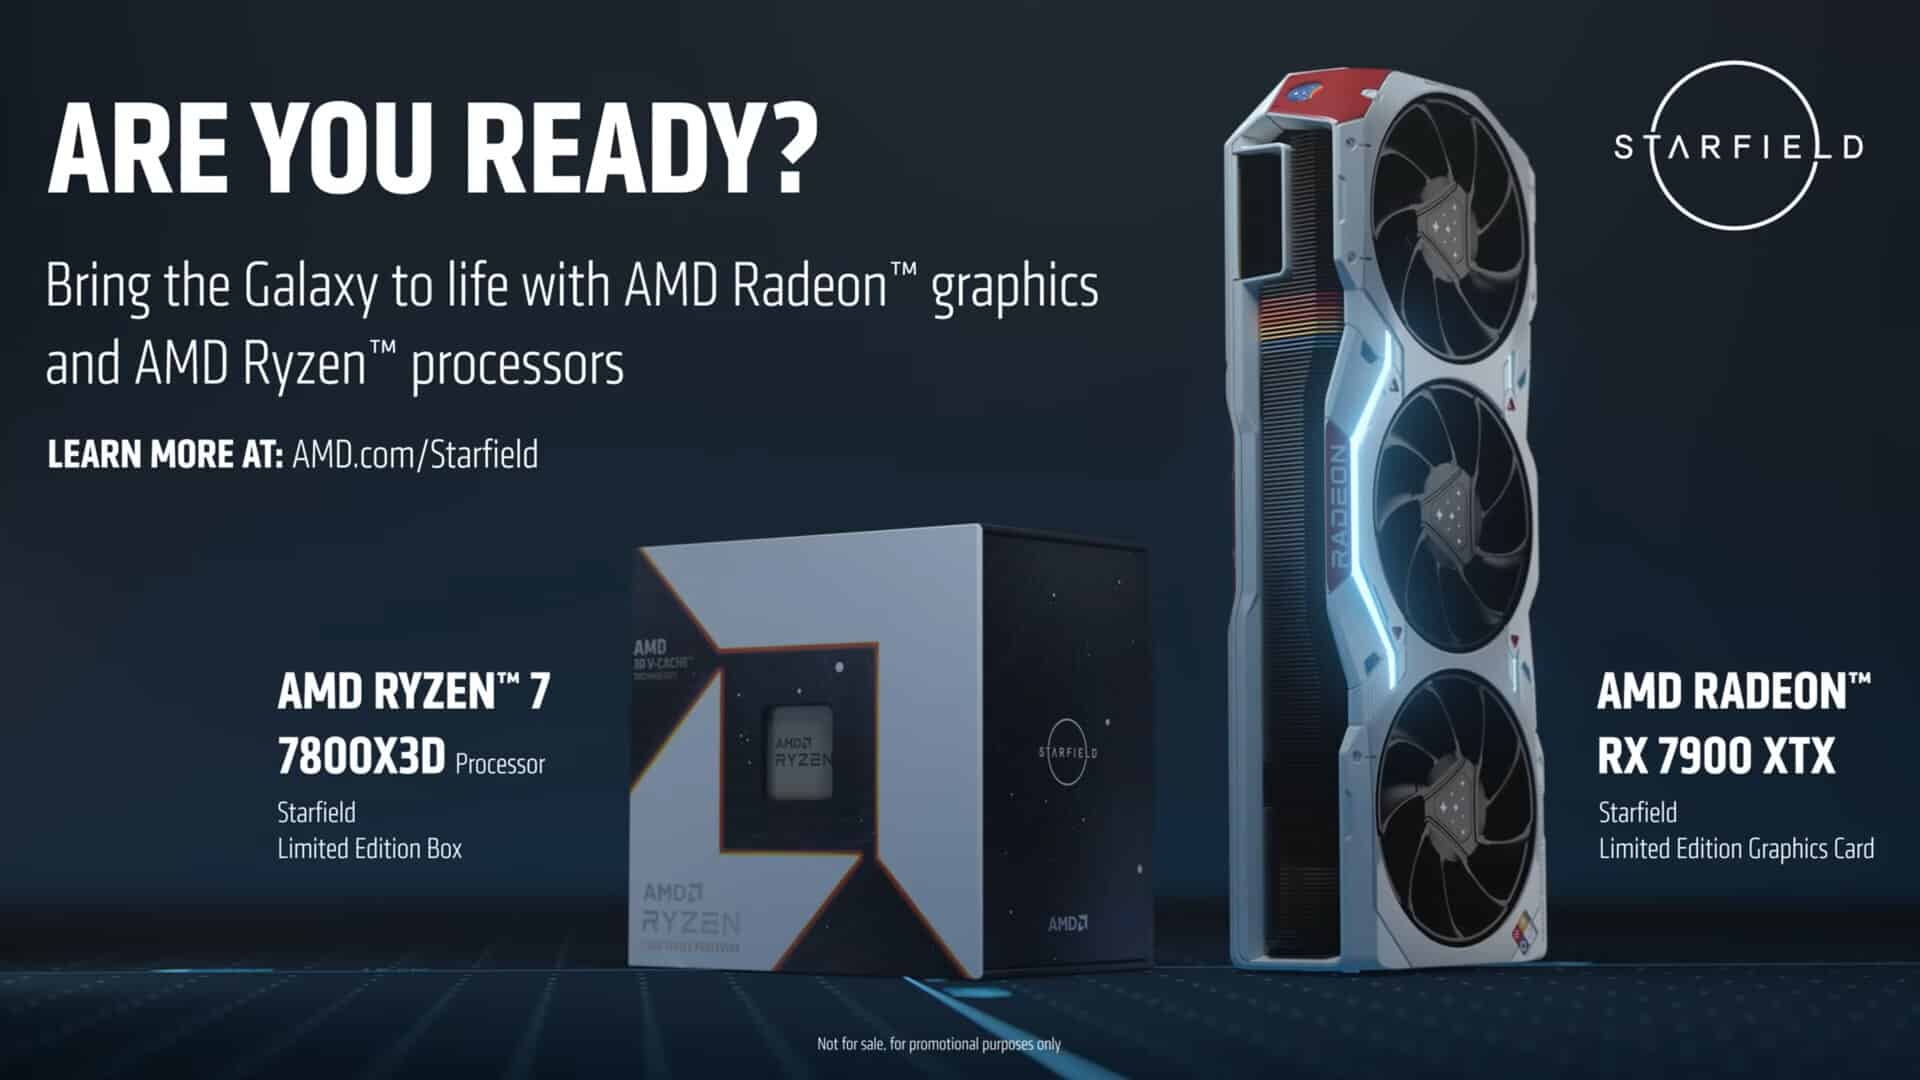 Crazy Thing: AMD Reveals Radeon RX 7900 XTX and Ryzen 7 7800X3D Starfield Limited Edition
